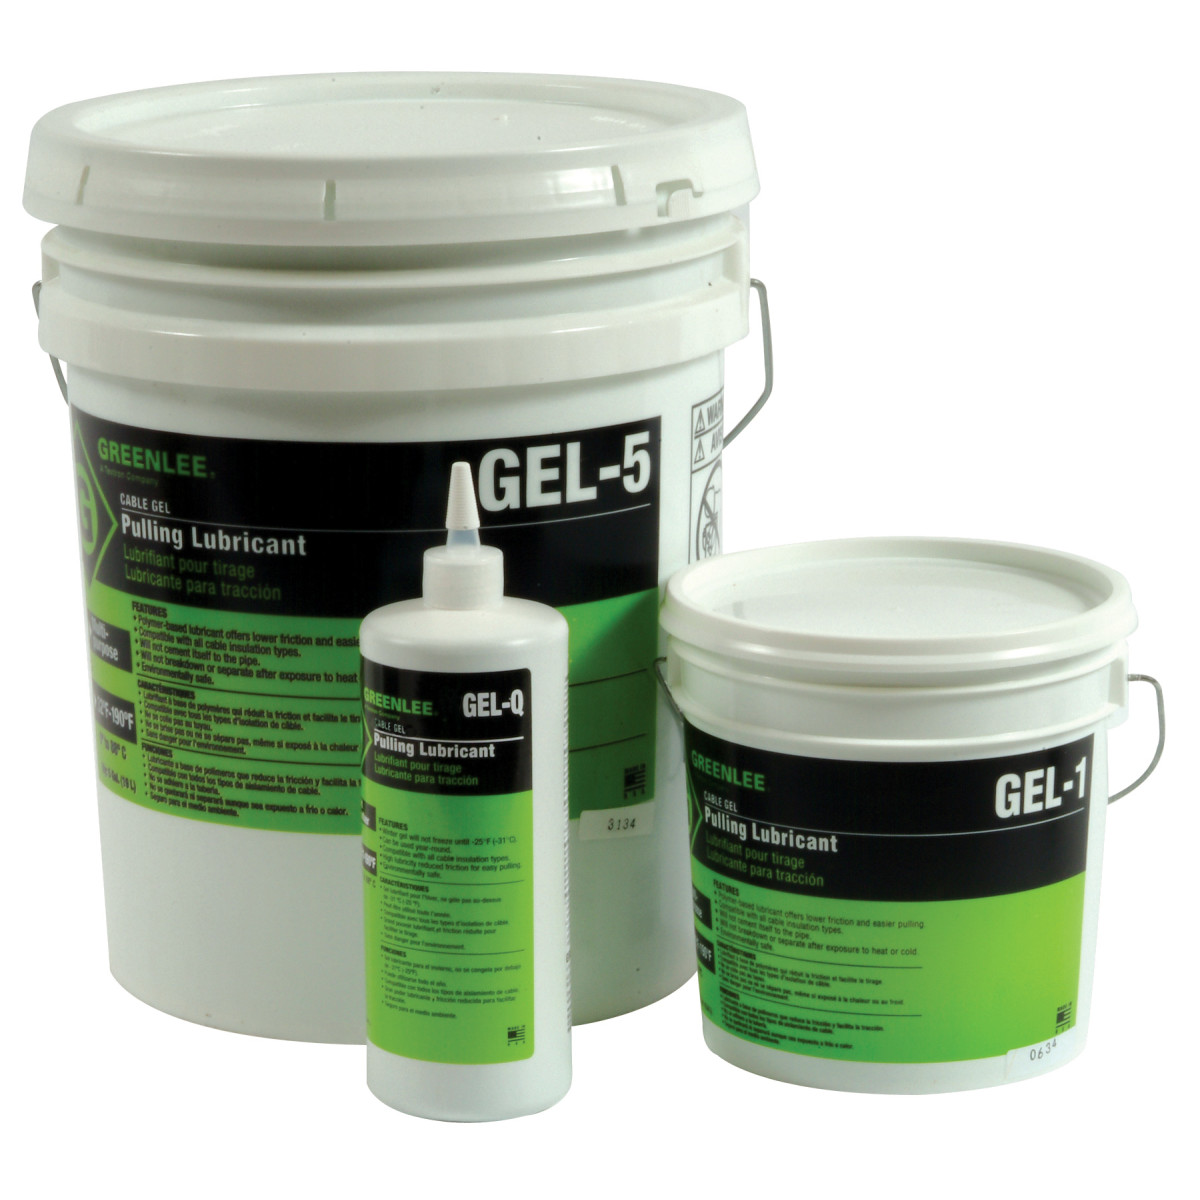 Cable-Gel™ Cable Pulling Lubricant Five (5) Gallon.  Polymer-based, no silicon lubricant offers lower friction and easier pulling.  Compatible with all cable insulation types.  Cleans up quickly.  Non-staining.  Higher lubricity than competitive products.  Will not cement itself to the pipe.  Dries slowly.  Can be applied by hand or pump.  Will not break down or separate after exposure to heat or cold.  Environmentally safe/non-hazardous.